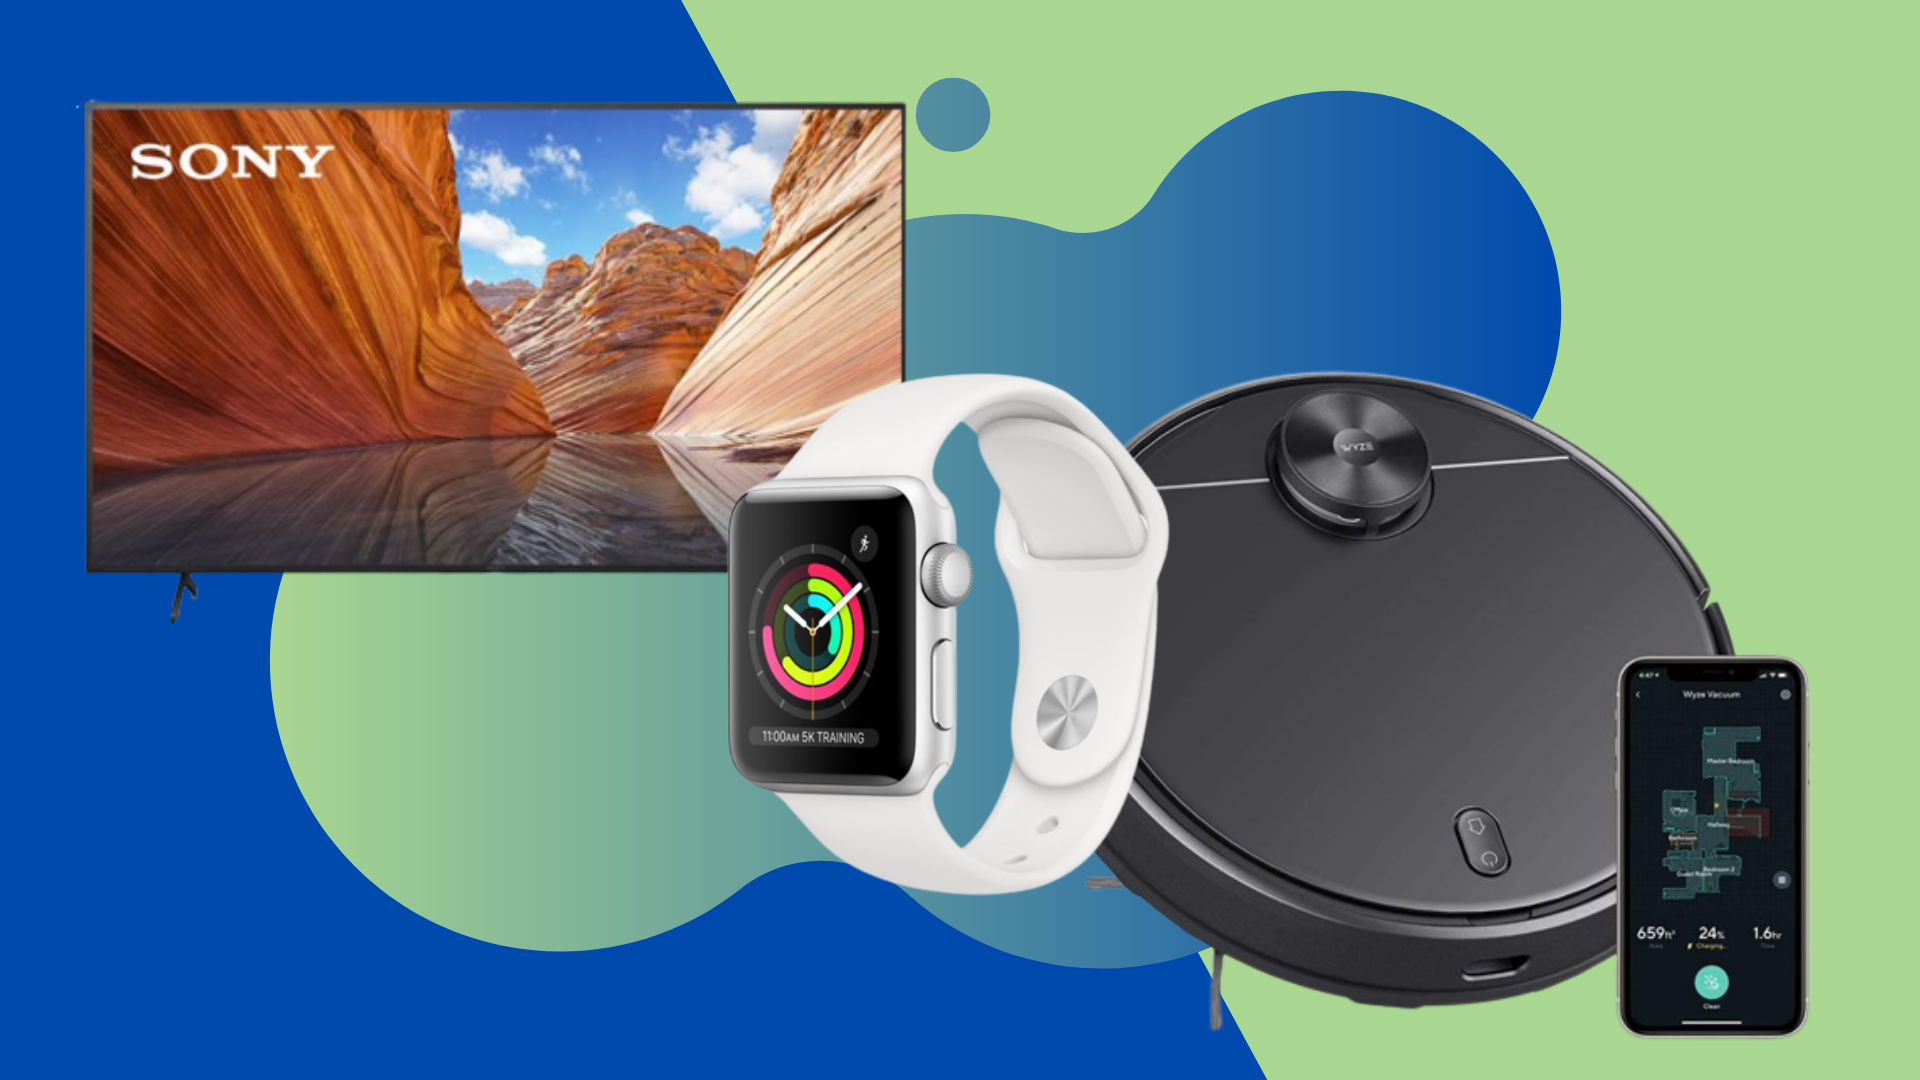 Collage with a TV, Apple Watch, and Robot vacuum